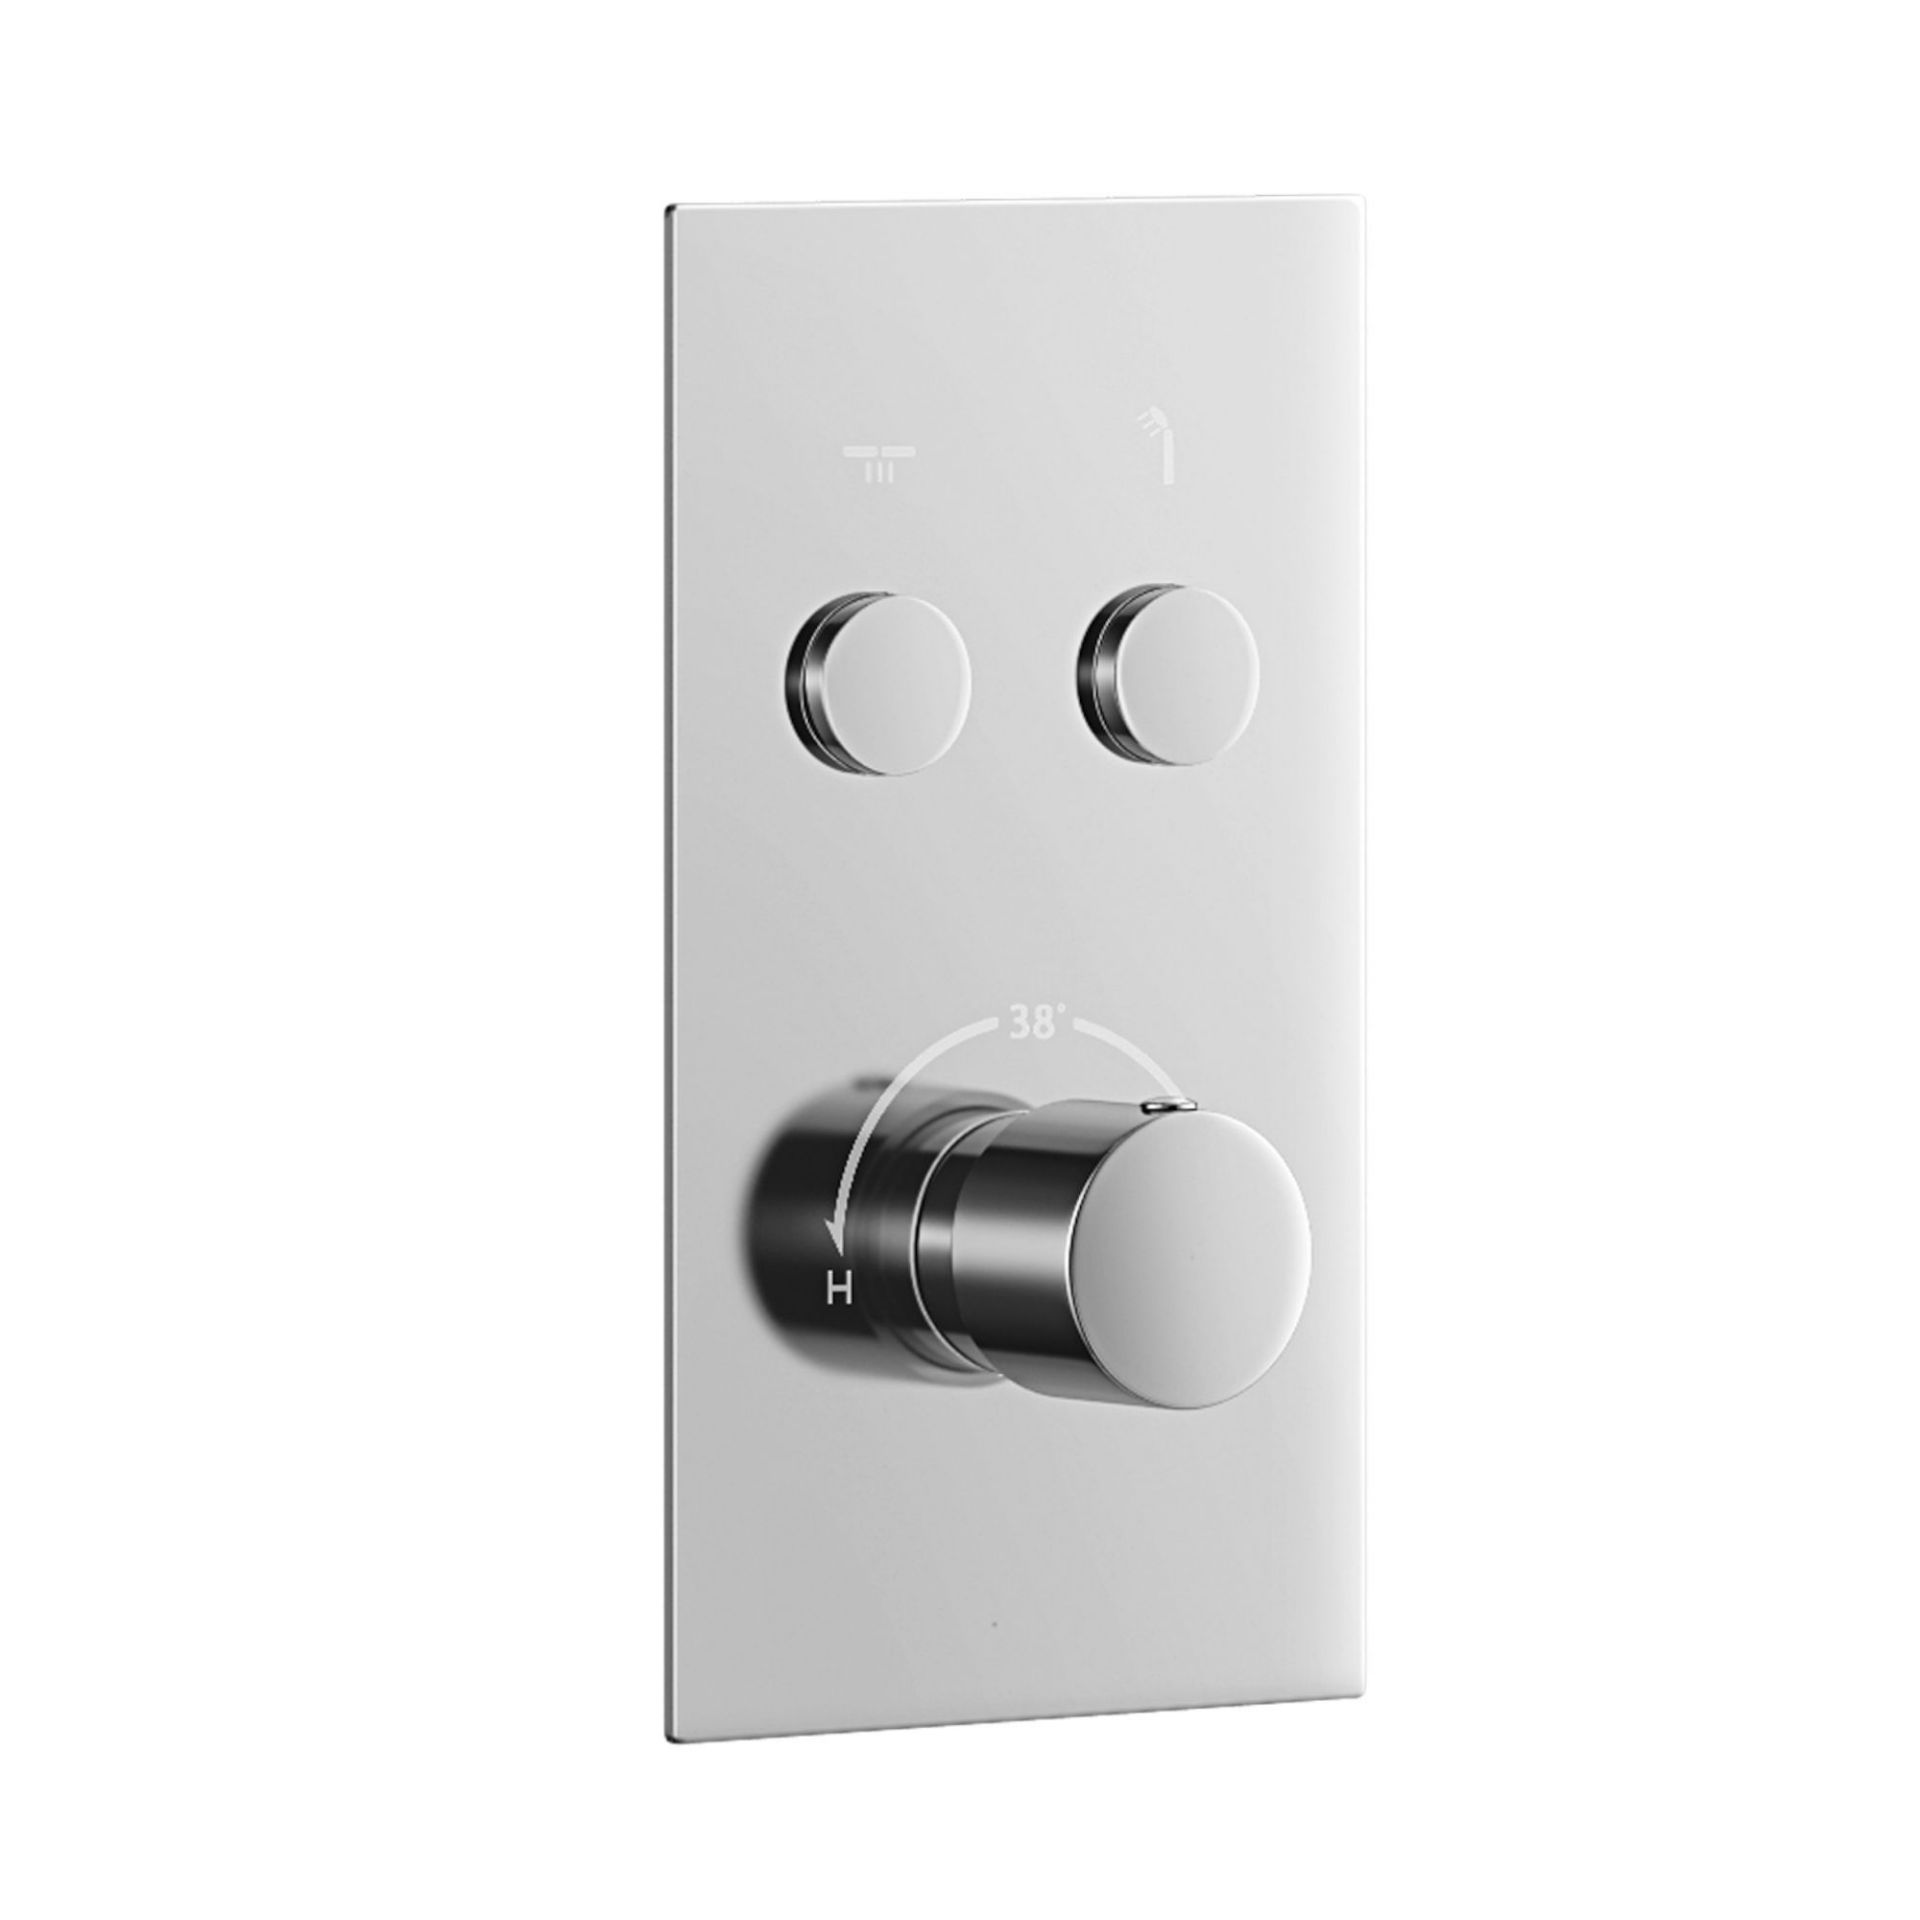 (NK62) Two Way Push Button Valve. Innovative two way push button shower valve Ê Ê Ê This stock is